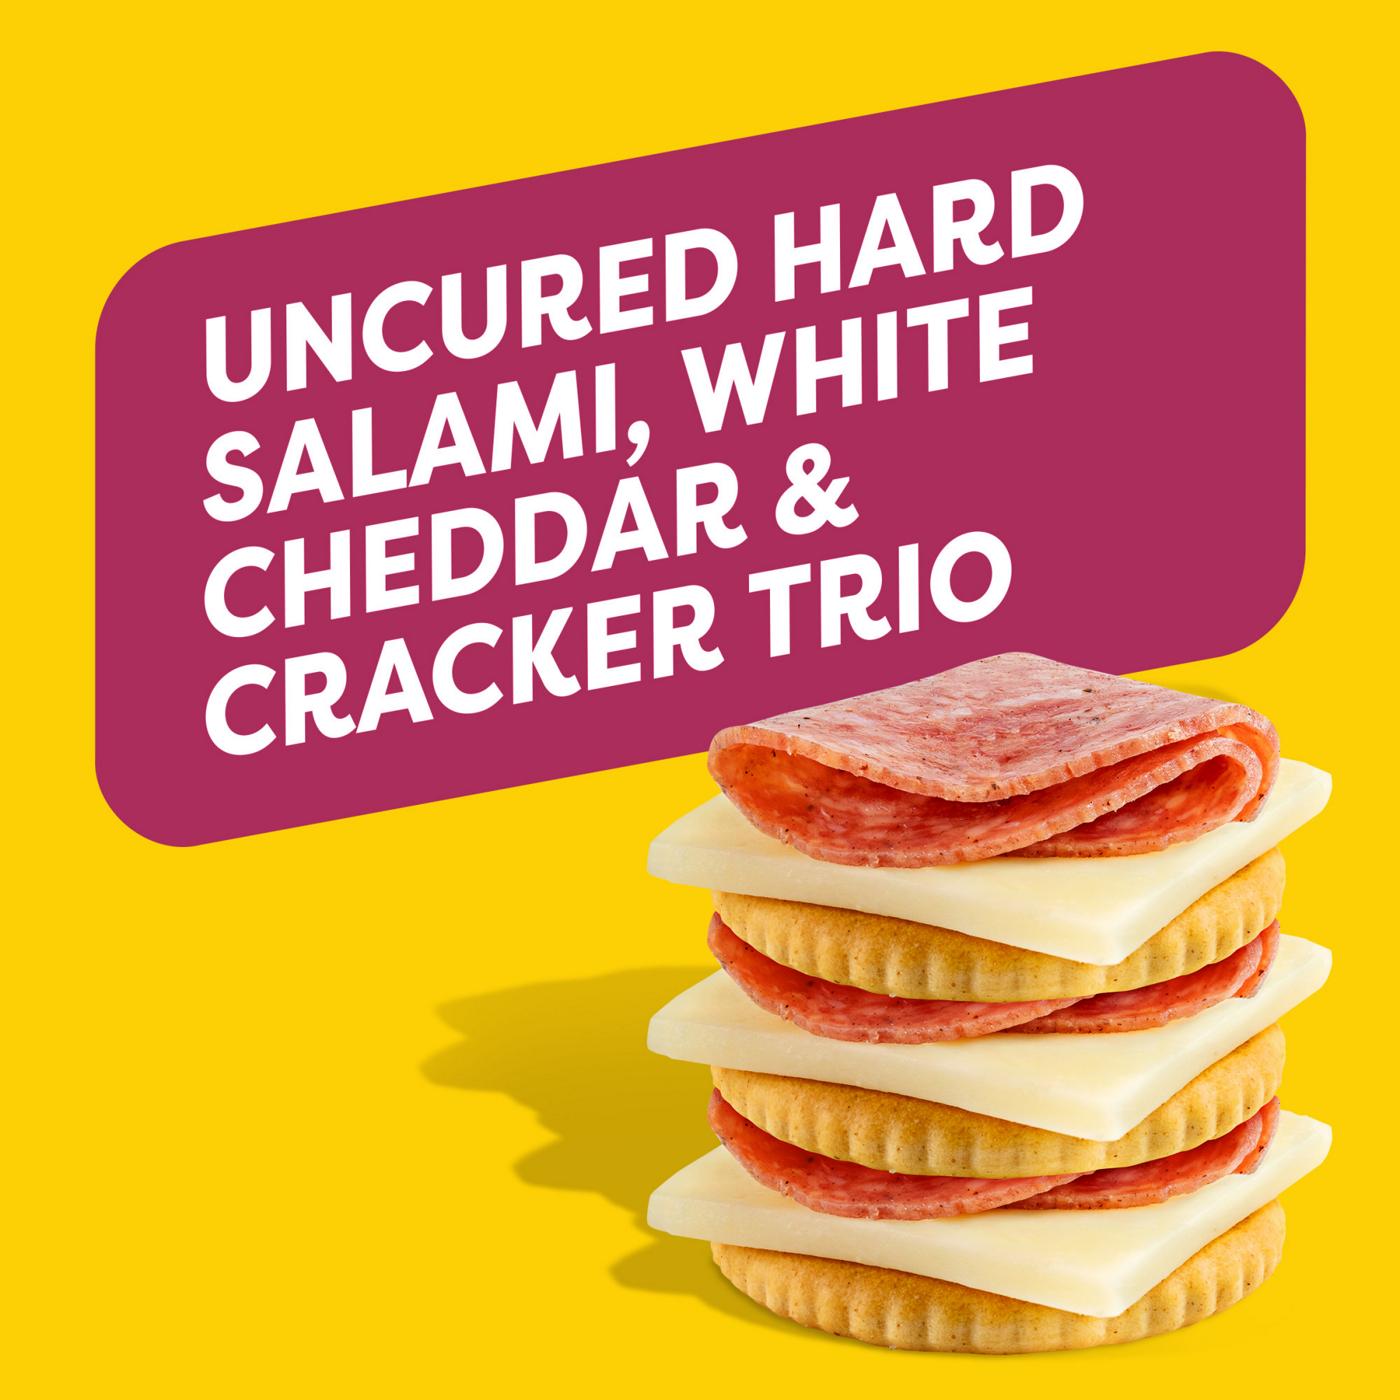 Oscar Mayer Bites Snack Tray - Uncured Hard Salami, White Cheddar & Crackers Trio; image 2 of 7